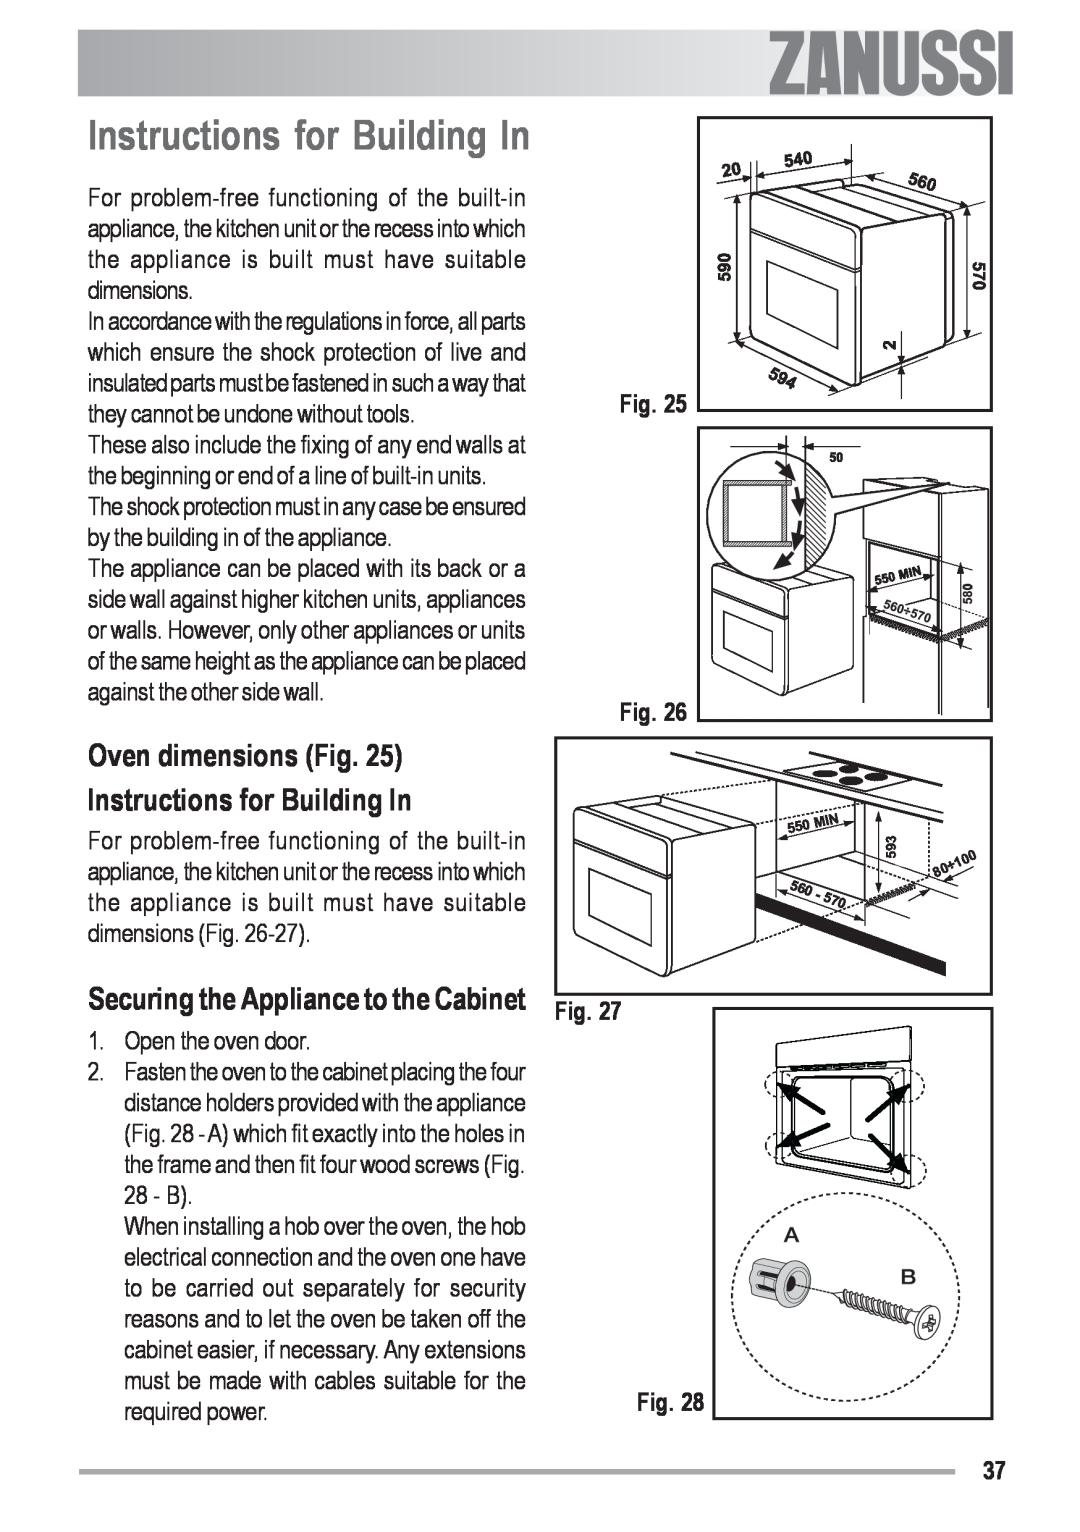 Zanussi ZYB 590 XL, ZYB 591 XL Oven dimensions Fig Instructions for Building In, Securing the Appliance to the Cabinet 